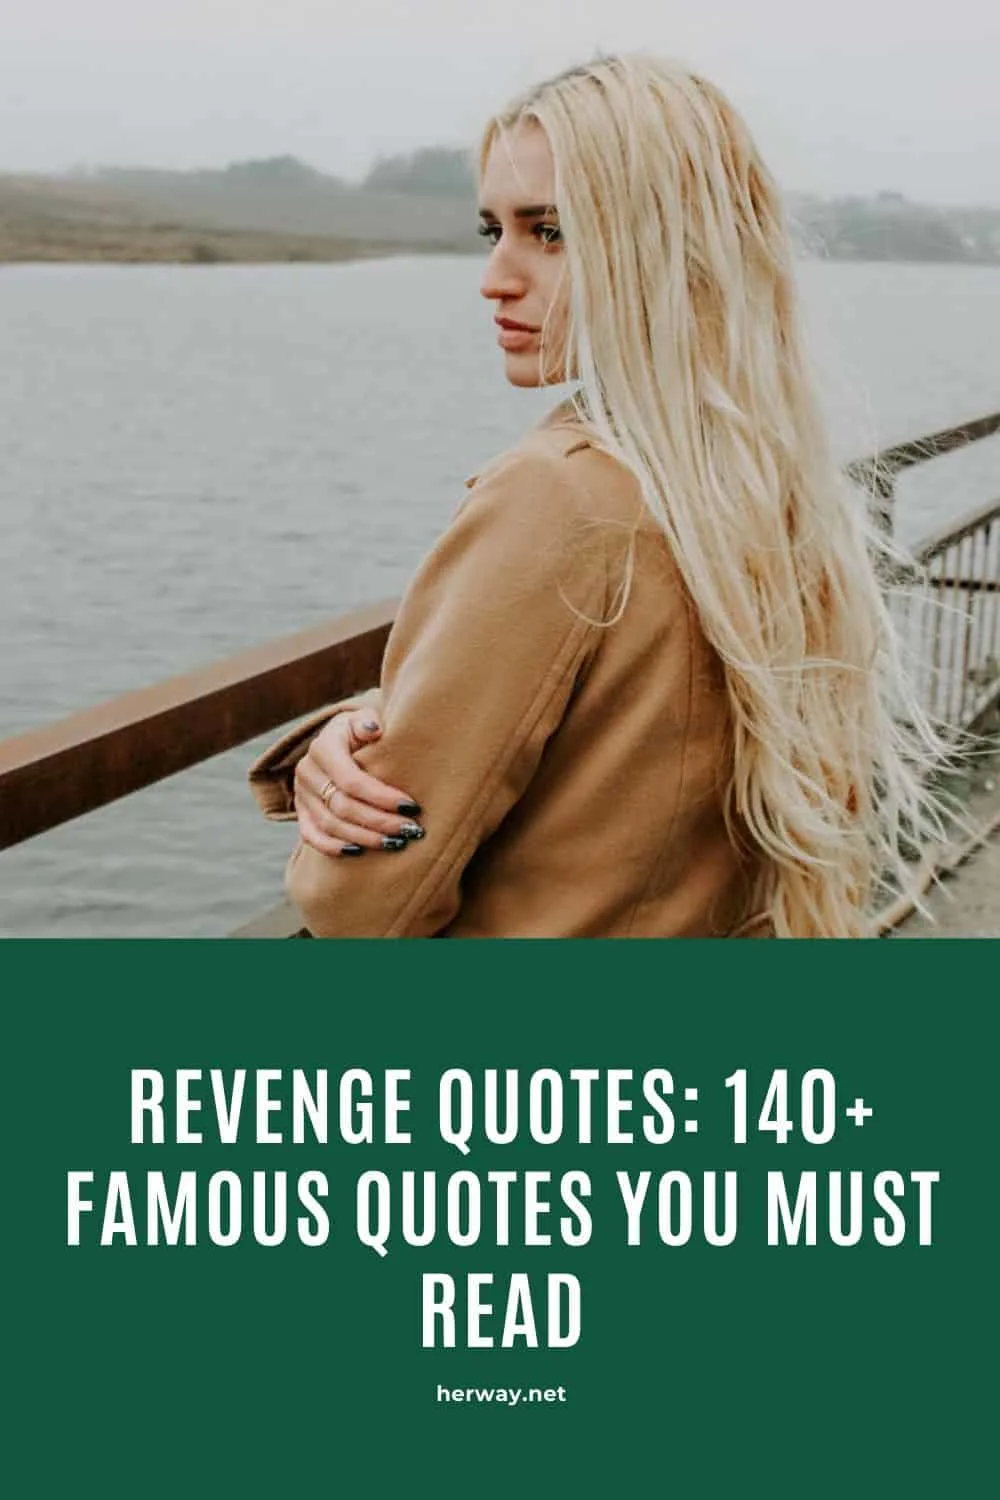 Revenge Quotes: 140+ Famous Quotes You Must Read